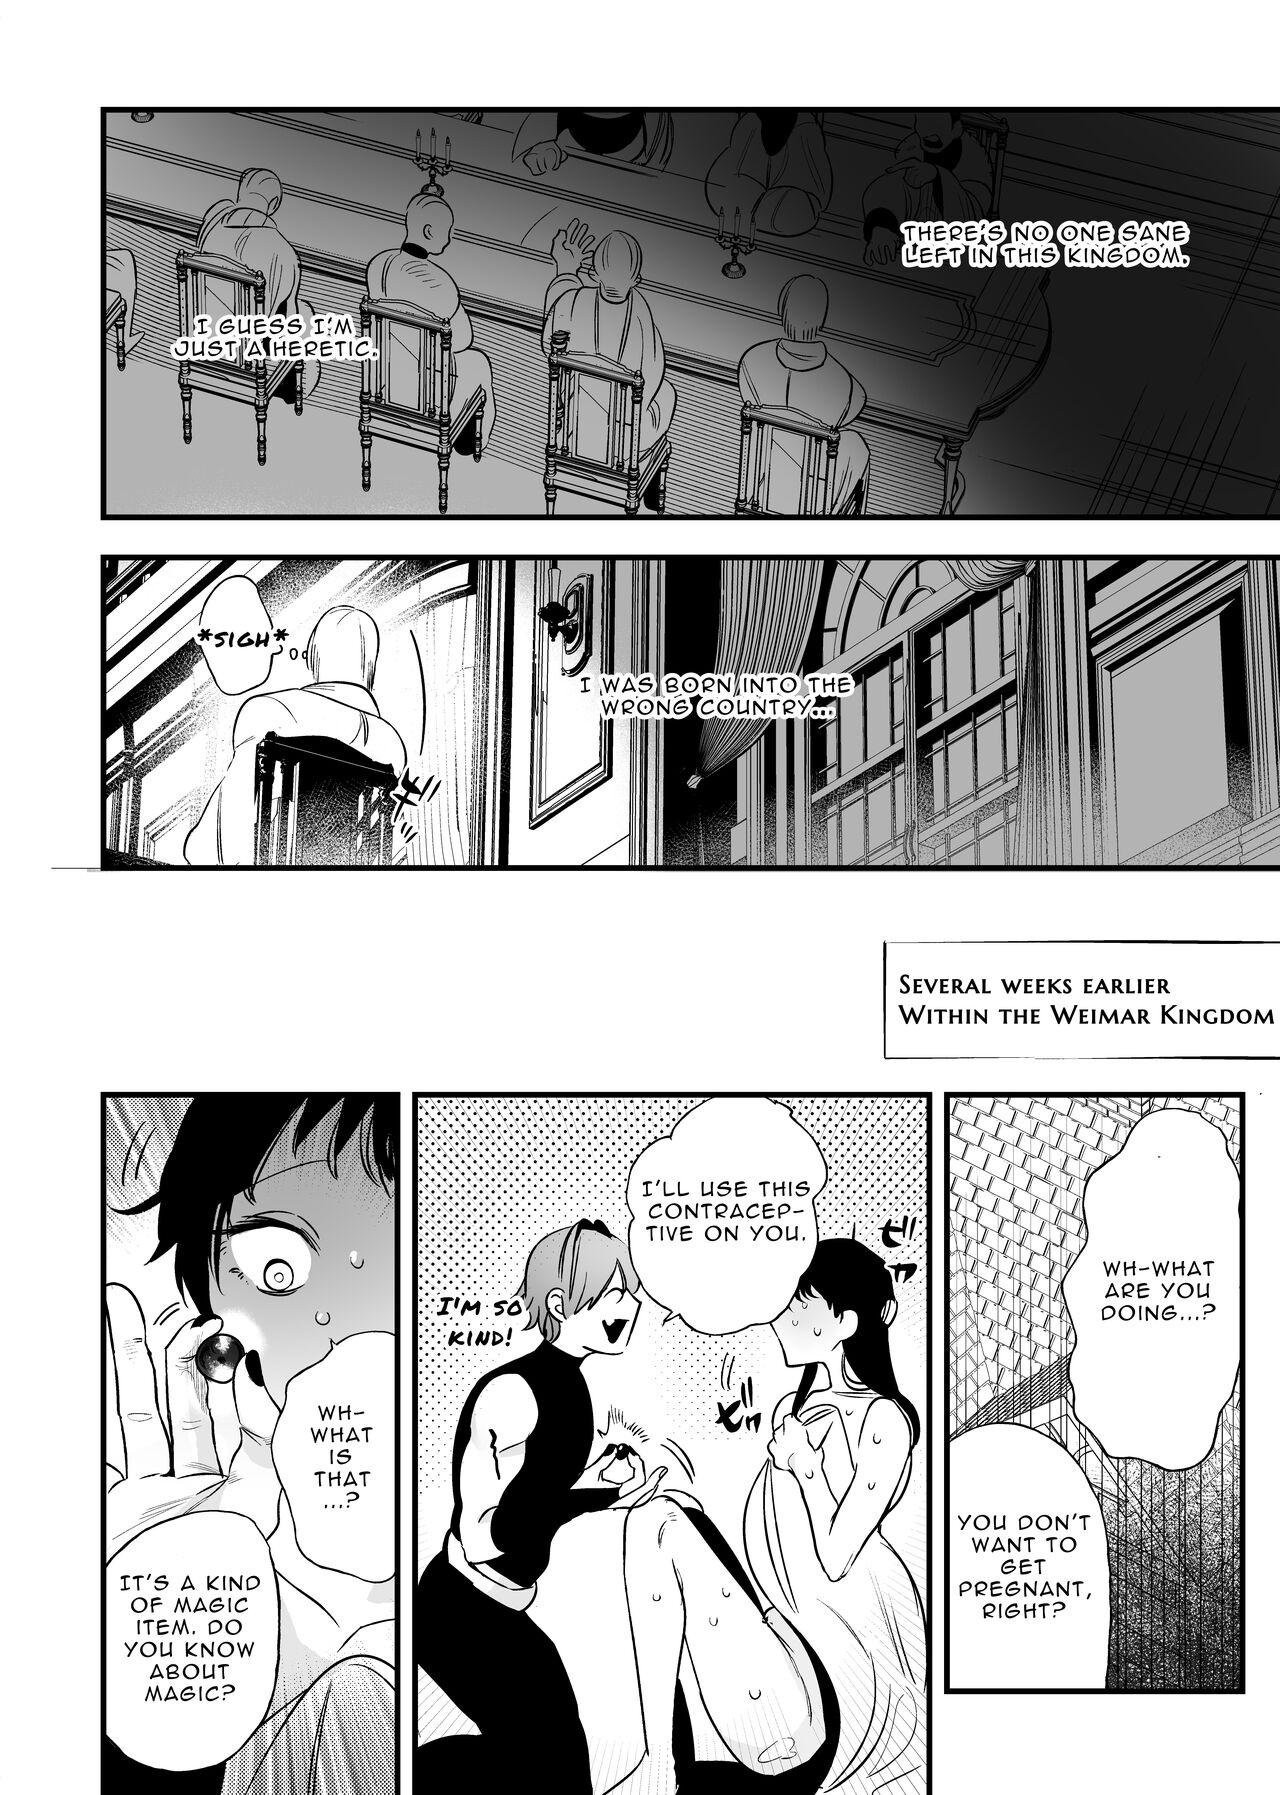 Sola The Man Who Saved Me on my Isekai Trip was a Killer... 2 - Original And - Page 8